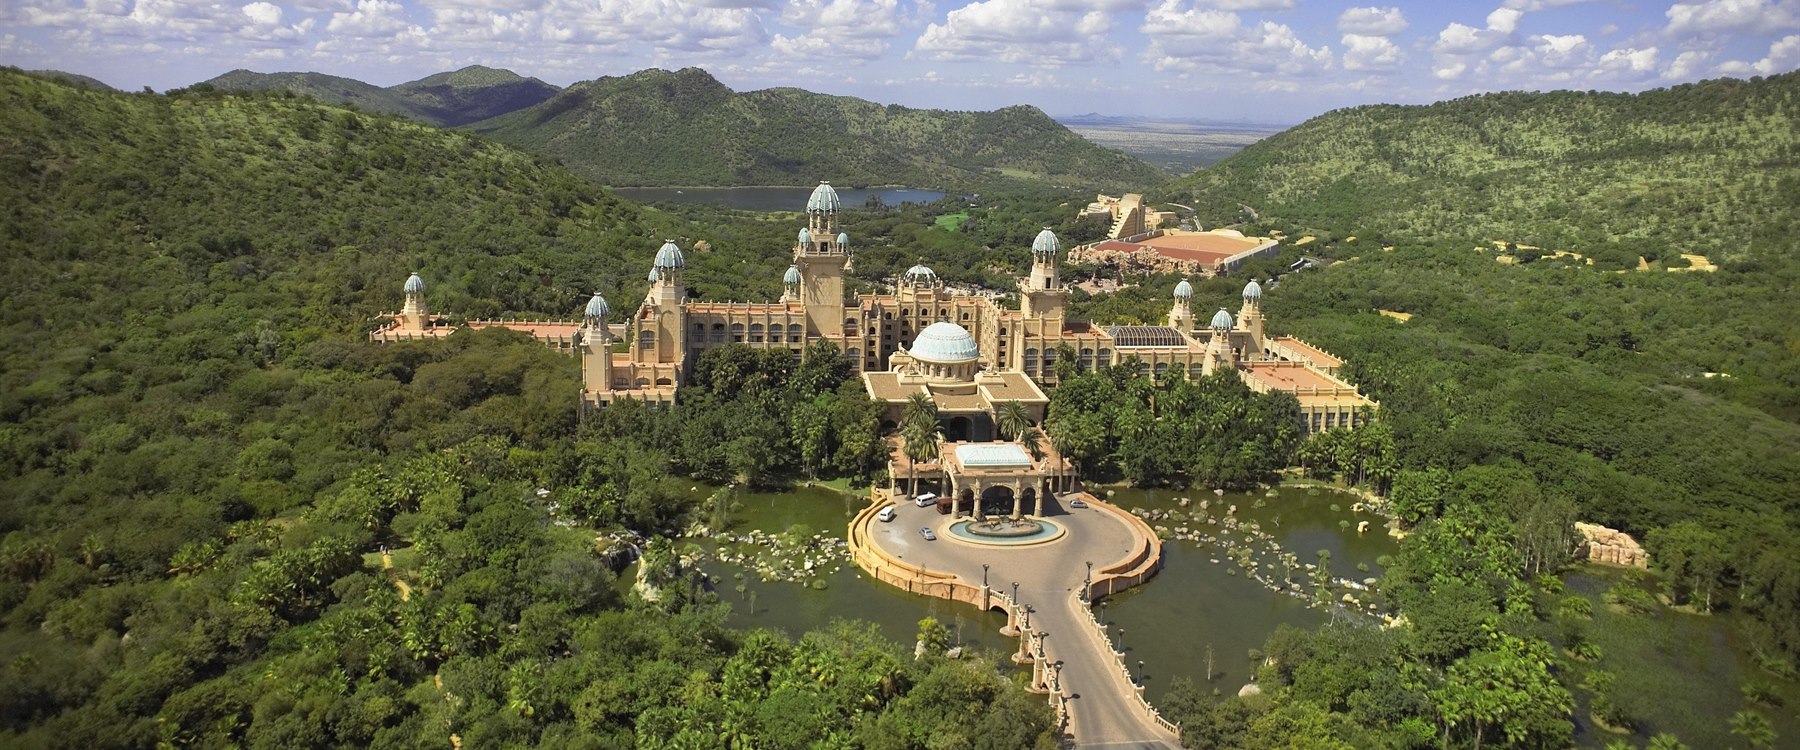 the palace of the lost city booking